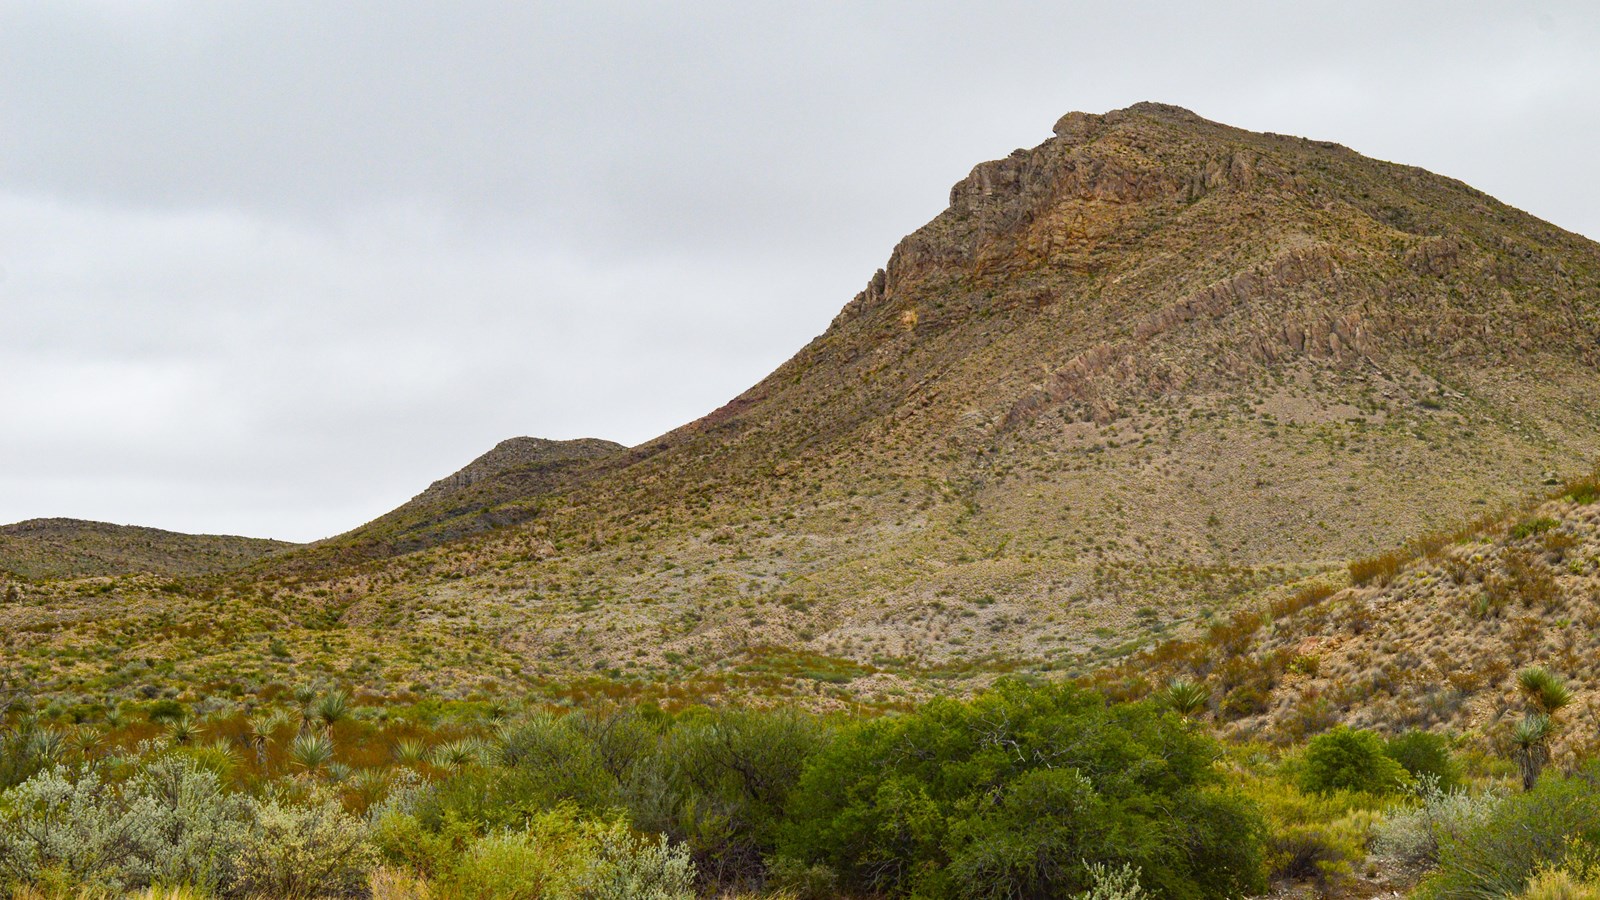 A mountain and line of cliffs stand out against a low desert landscape.